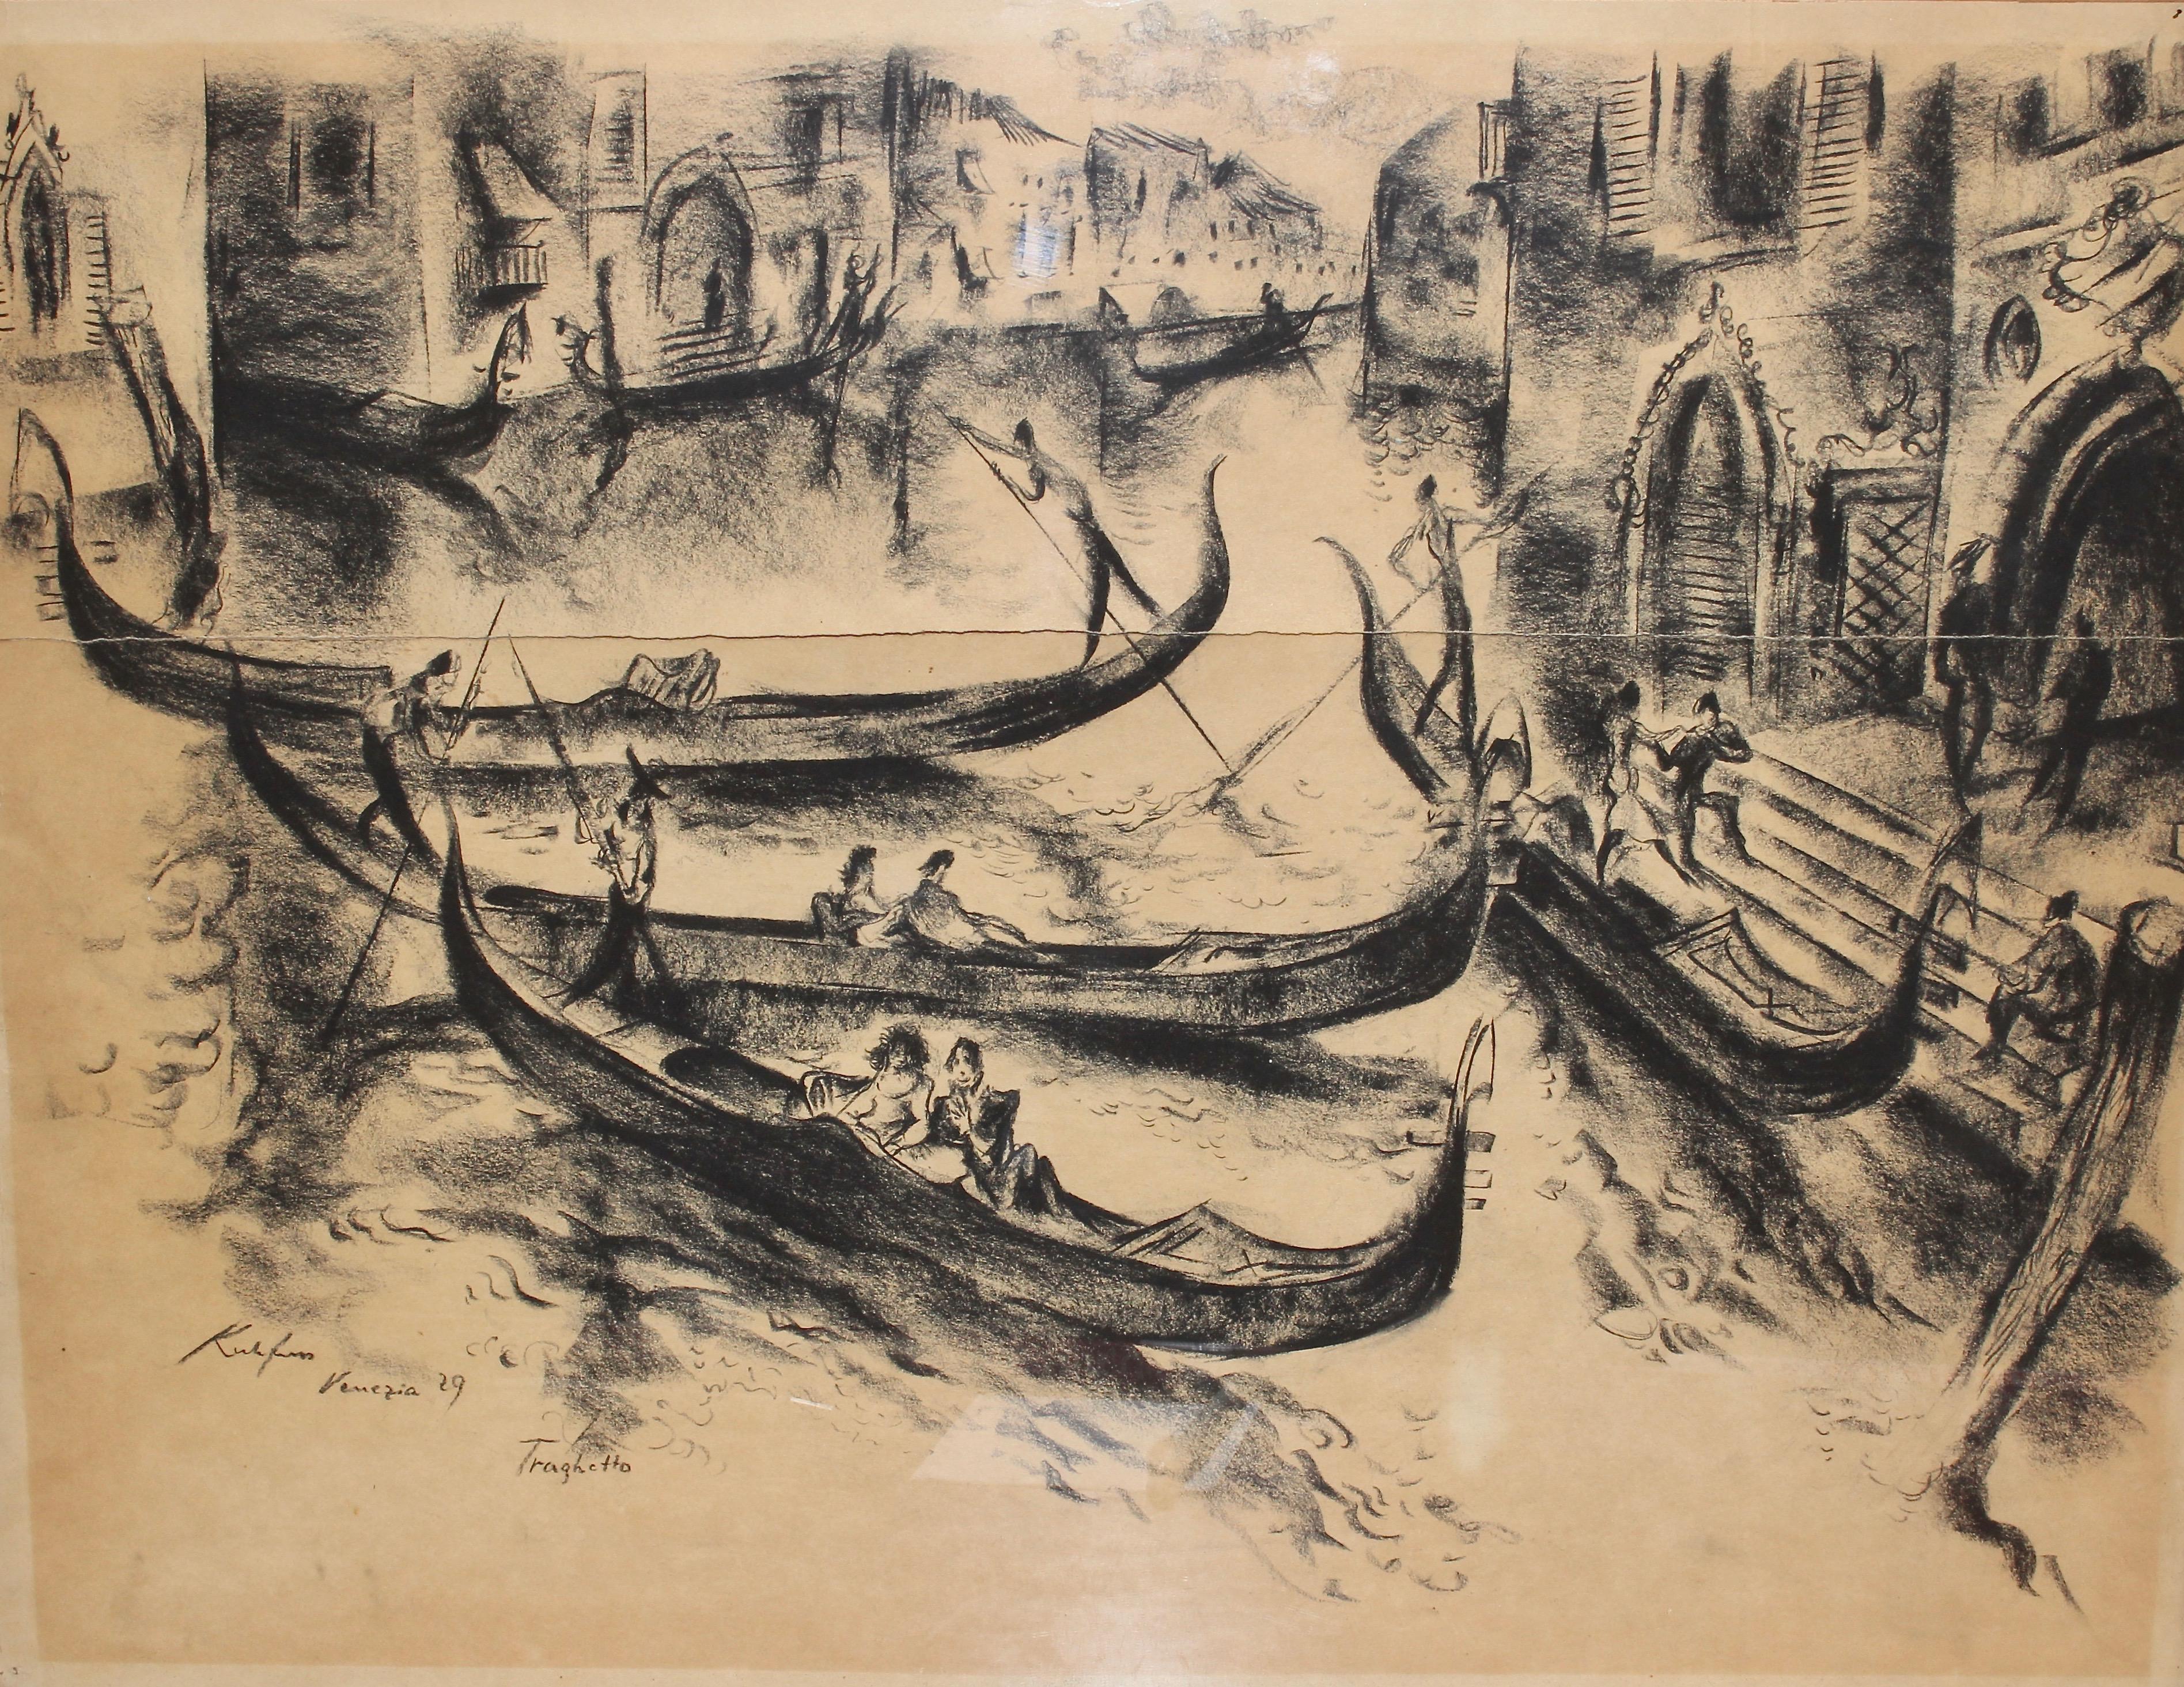 Painting, 20th century, charcoal drawing "Venice - Gondolier" by Paul Kuhfuss